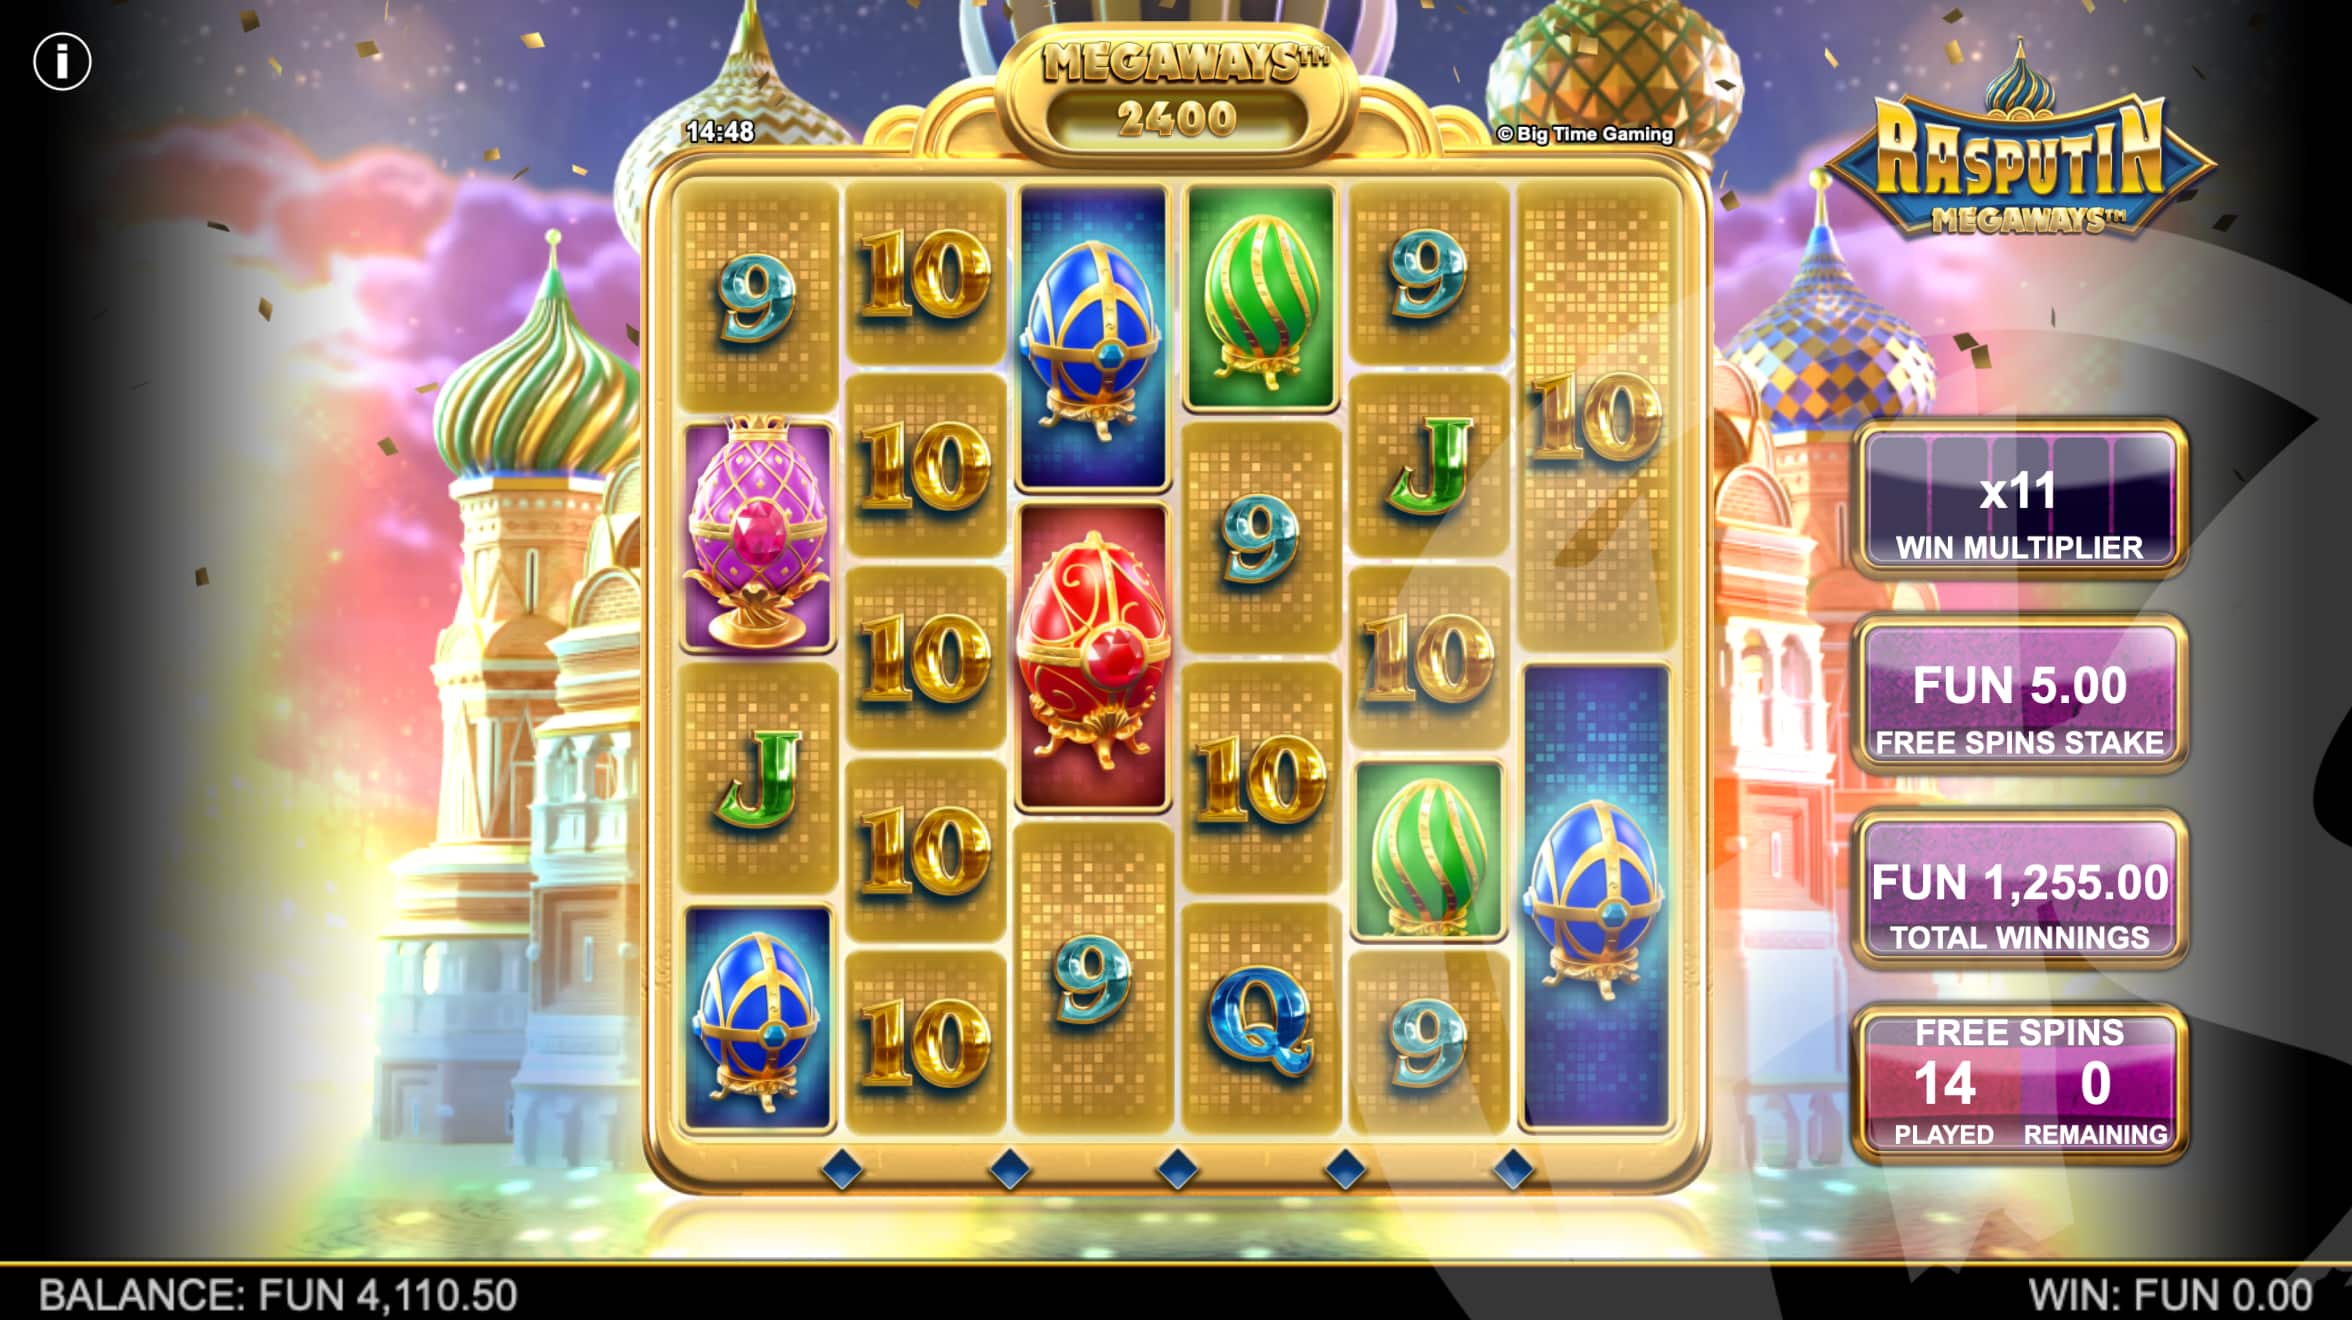 Ecstasy & Fire Free Spins